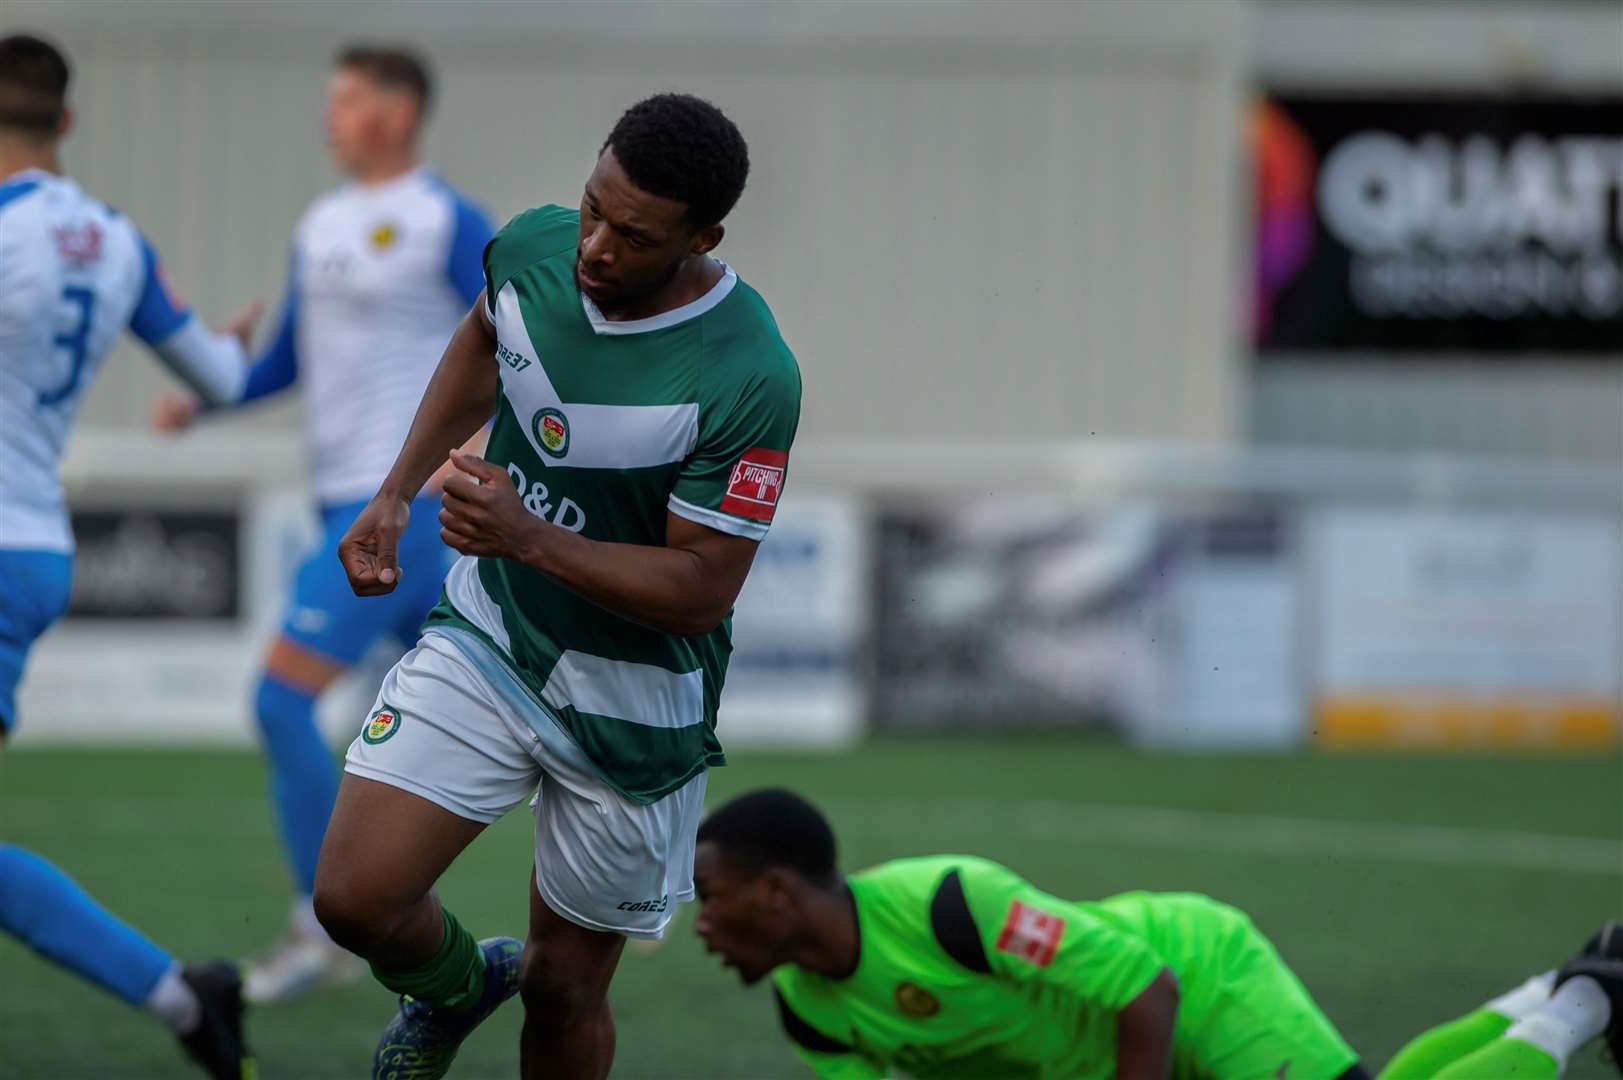 Vance Bola wheels away after scoring Ashford's second against Merstham. Picture: Ian Scammell